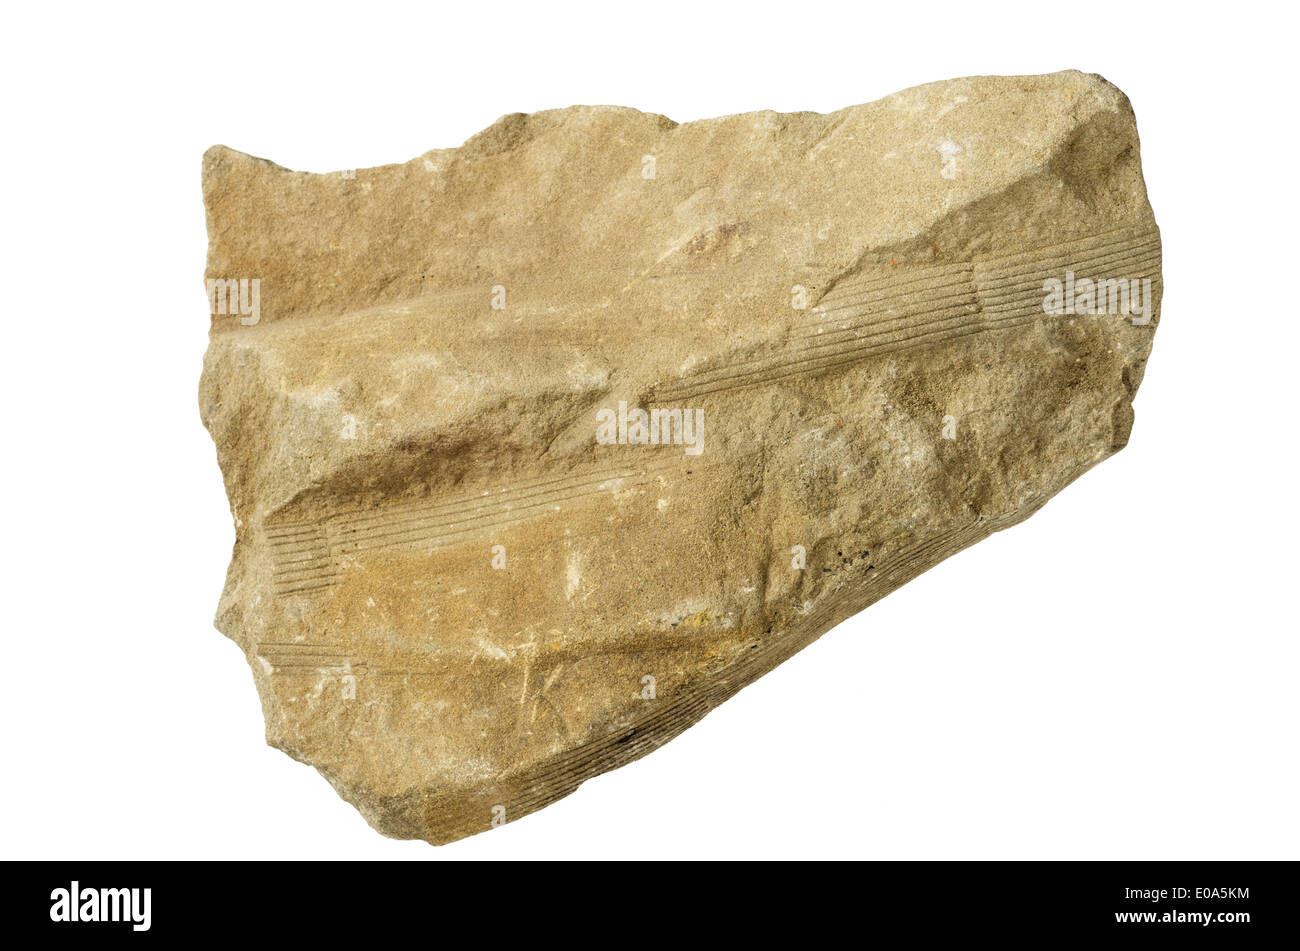 Sphenophyta or horsetail stem plant fossil isolated on white Stock Photo